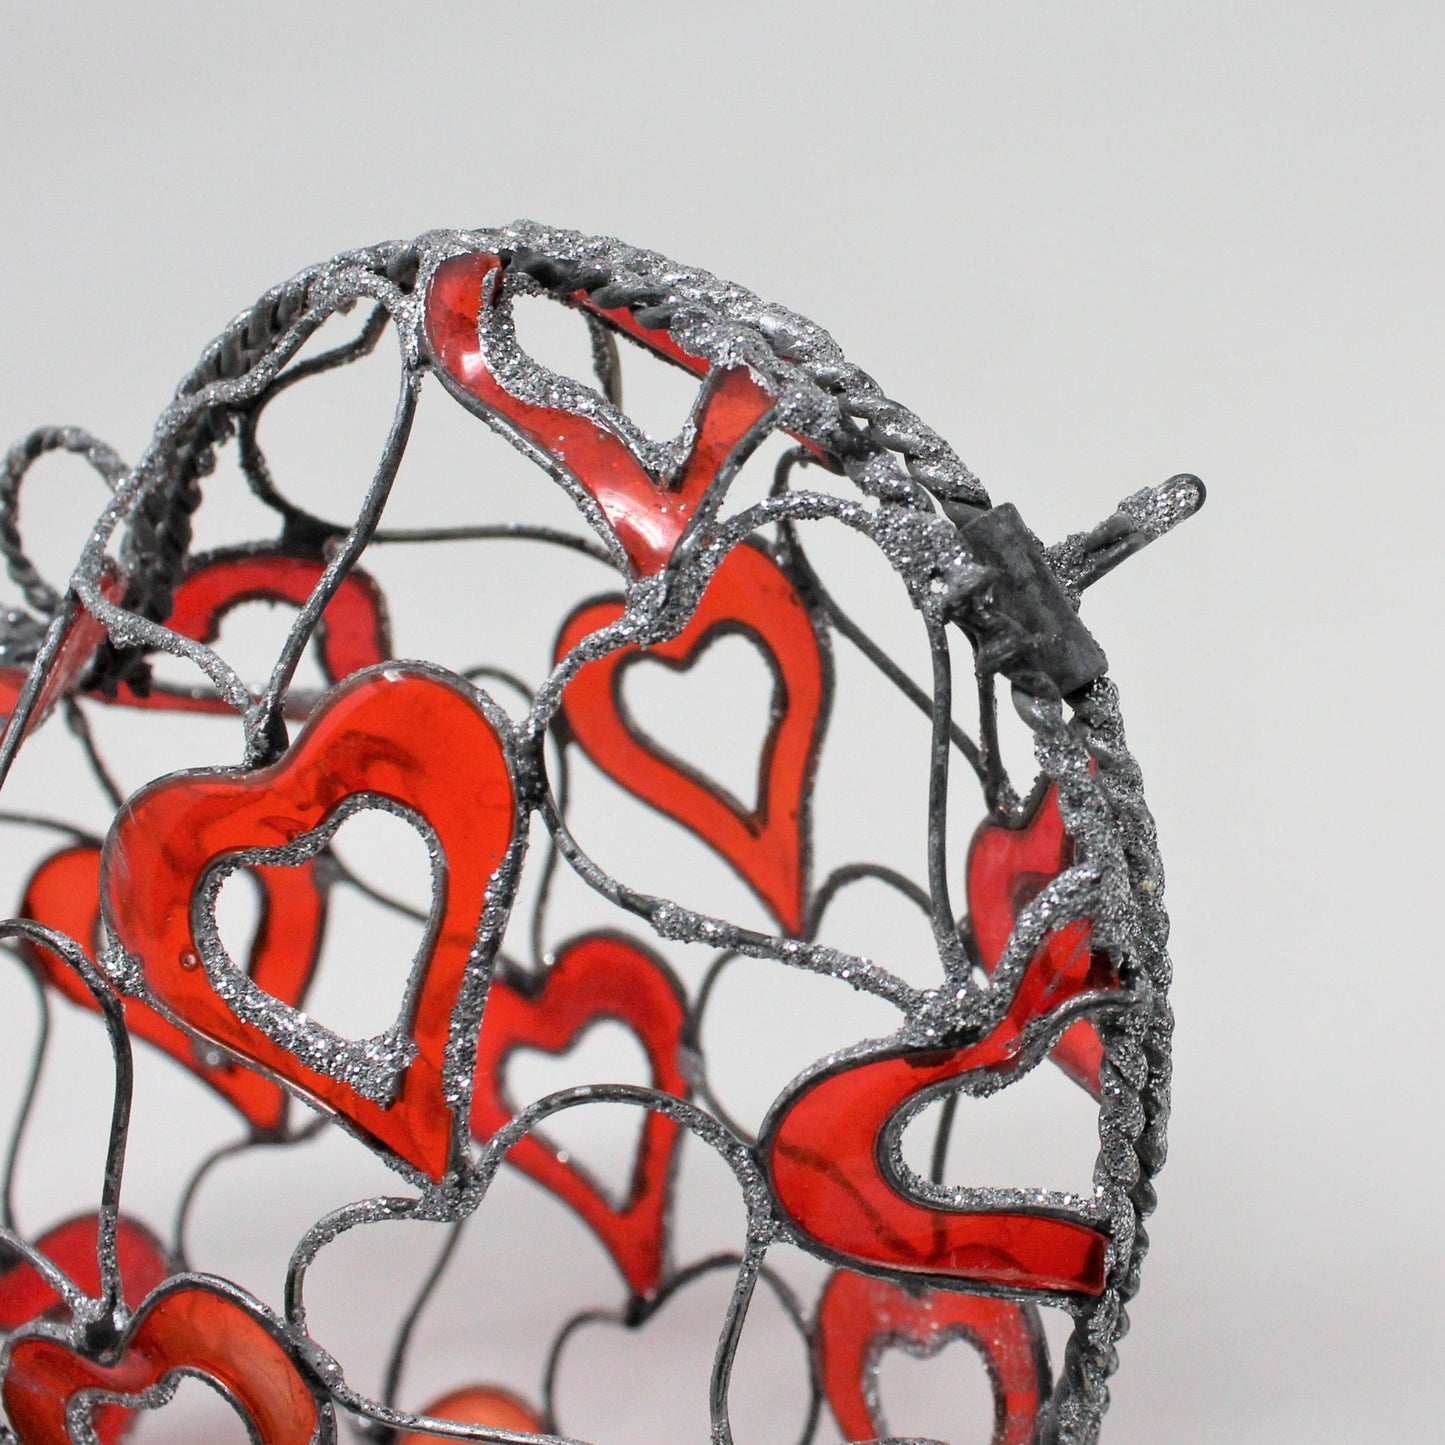 Heart, Wire and Enamel, Sun / Heart Catcher, Fillable, Hand Made